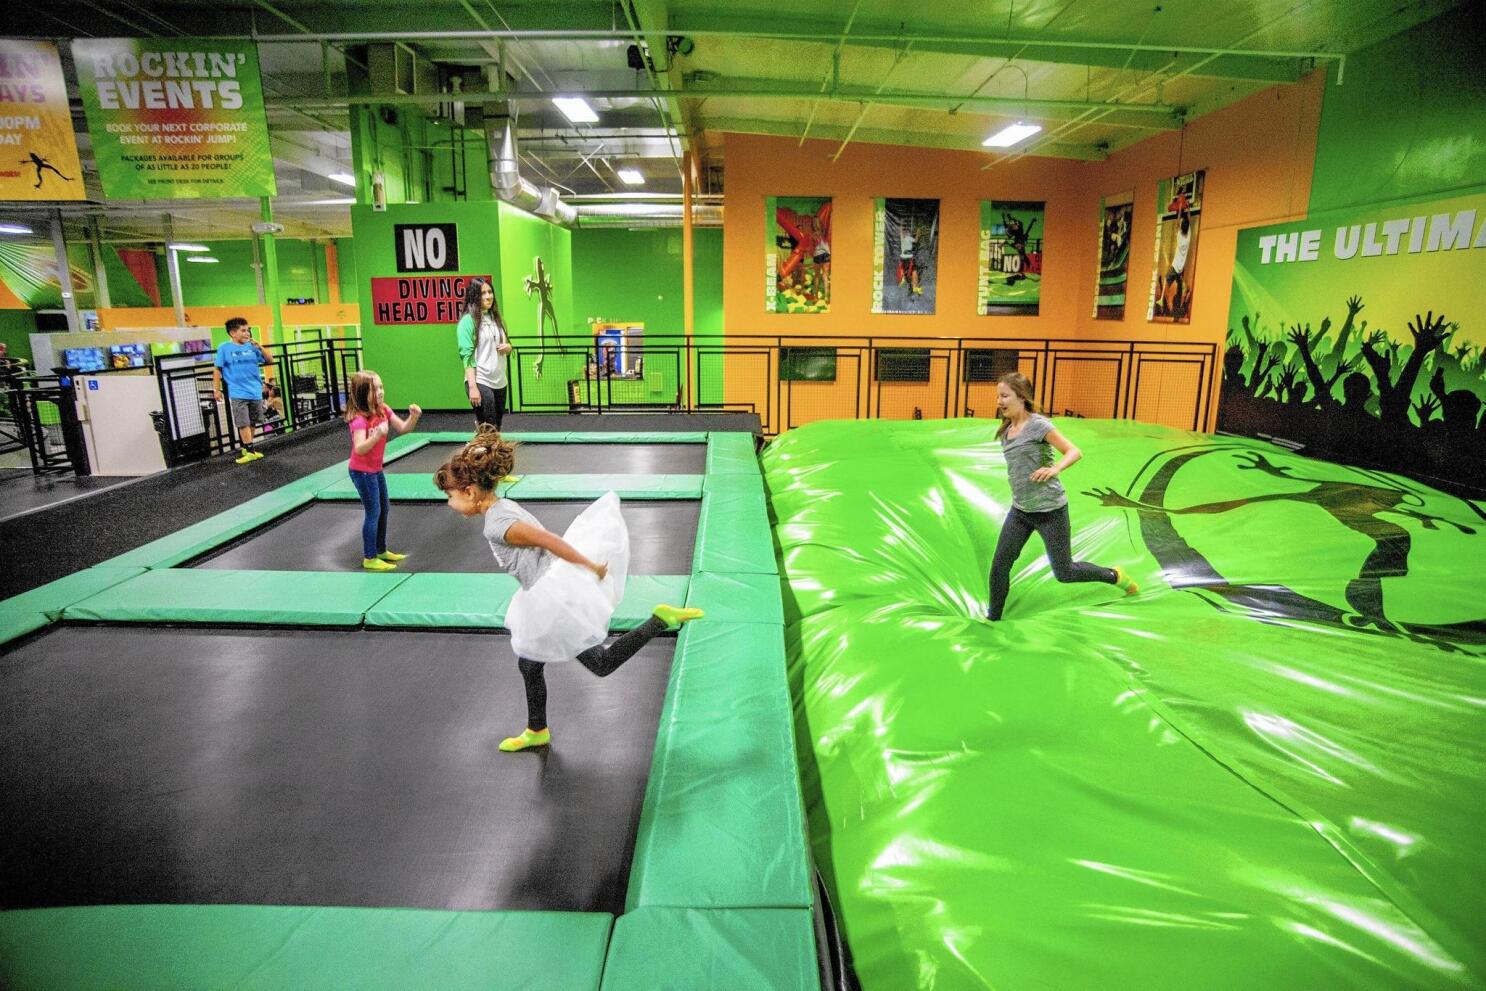 Jumping on Indoor trampoline parks are big business for owners, and and exercise for kids and adults - Los Angeles Times